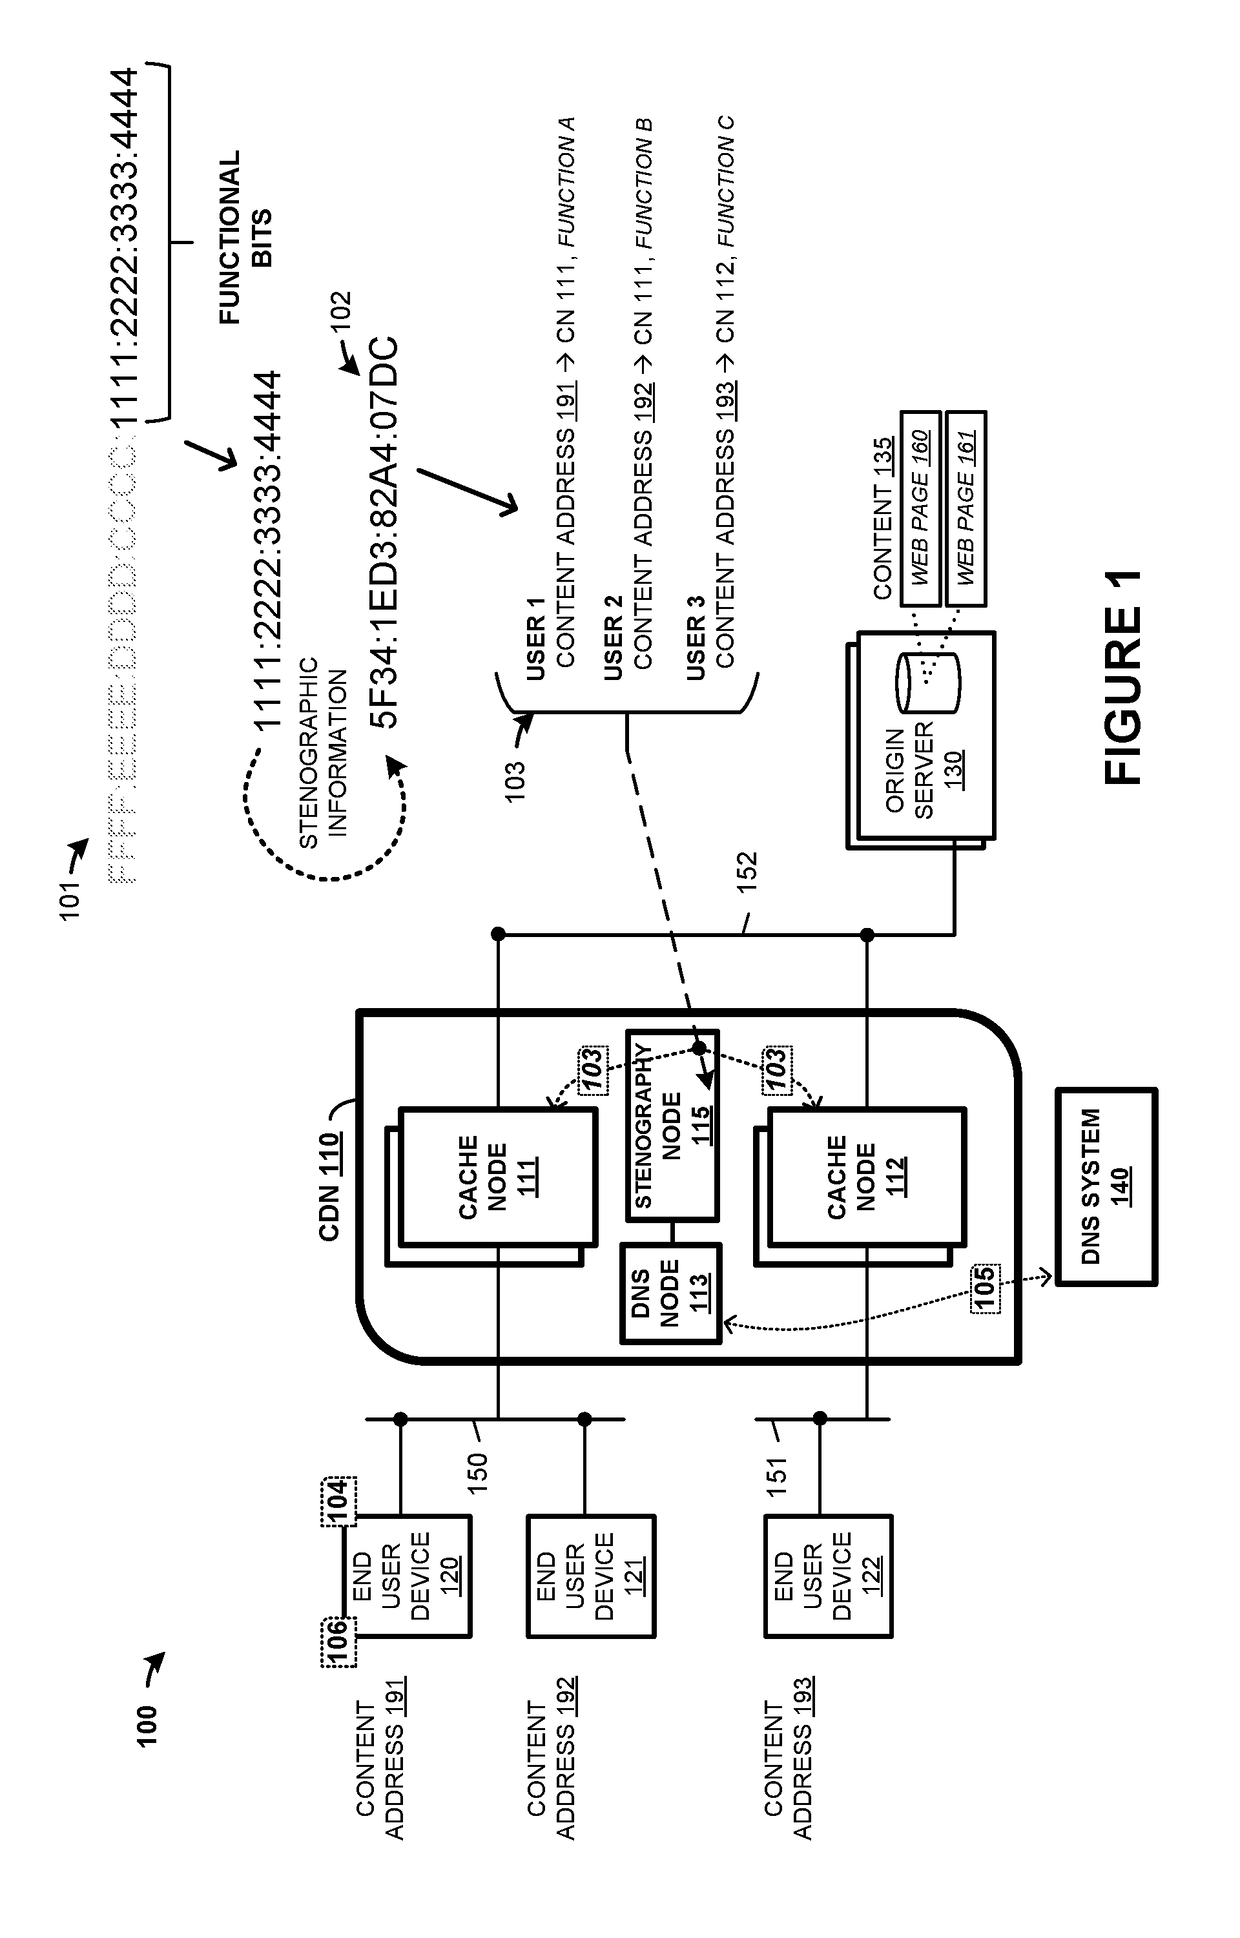 Anonymized network addressing in content delivery networks